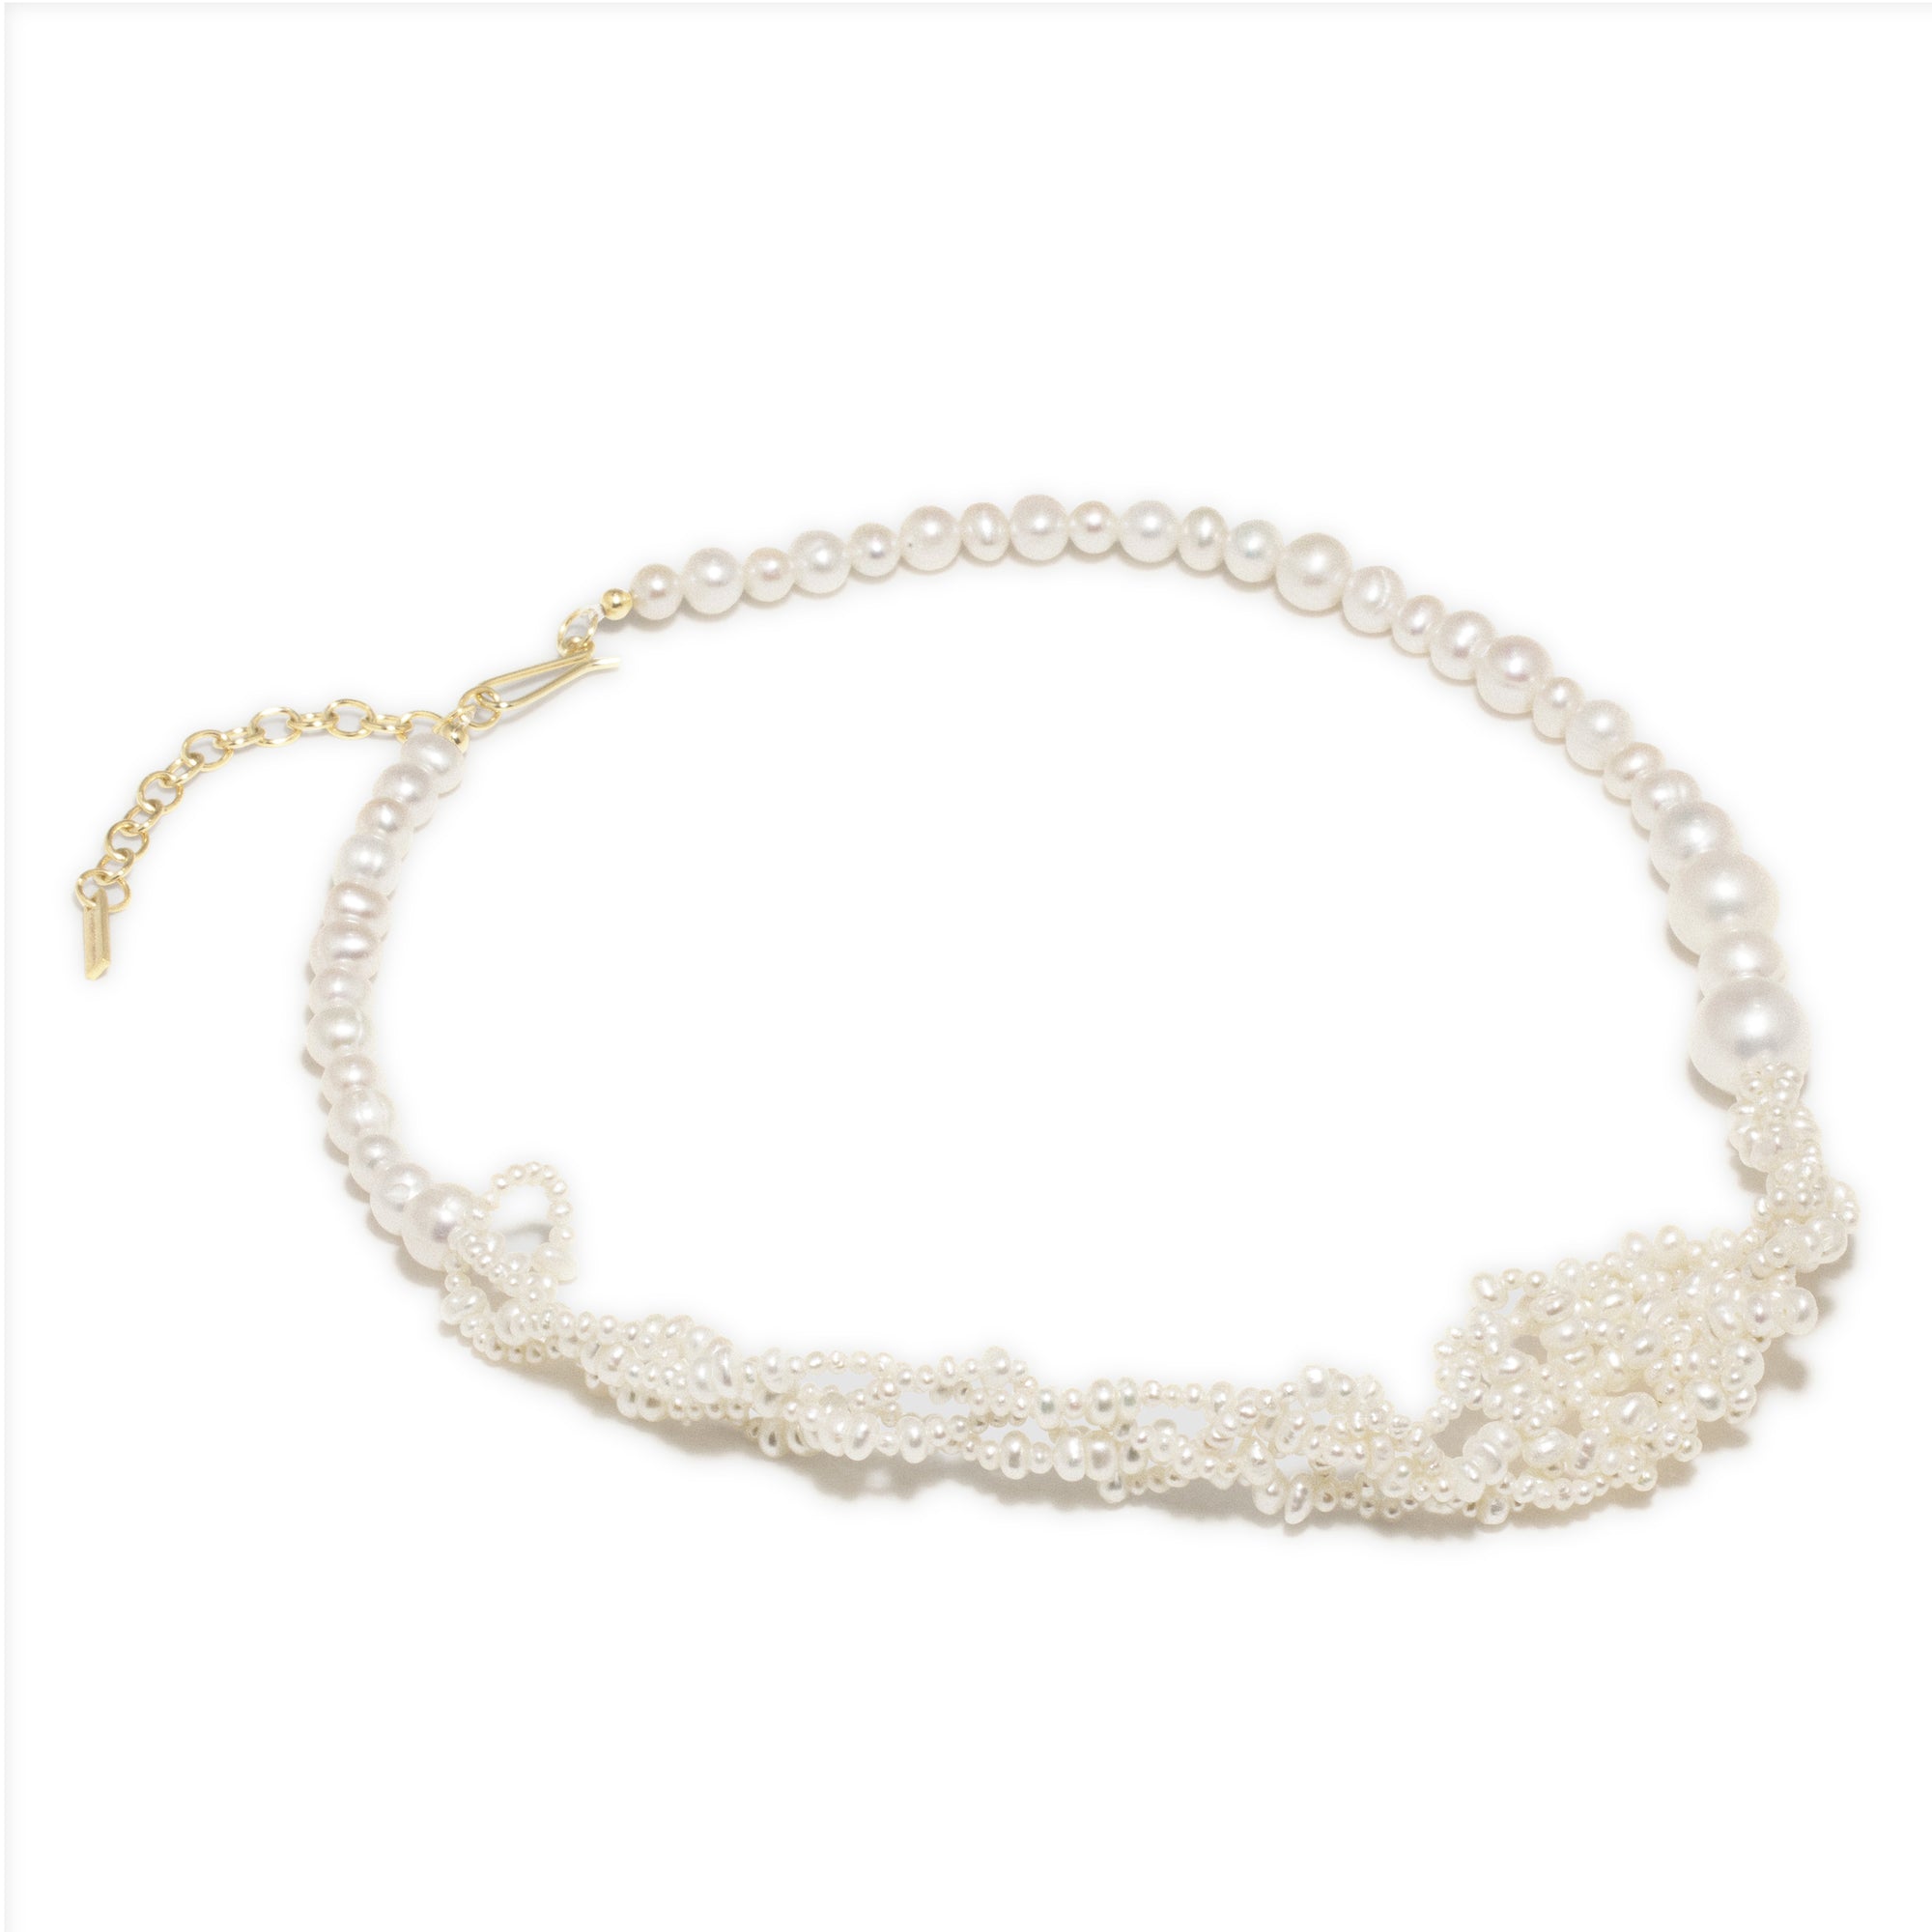 Completedworks - Women's Cove Necklace - (Pearl/Gold Vermeil) view 2